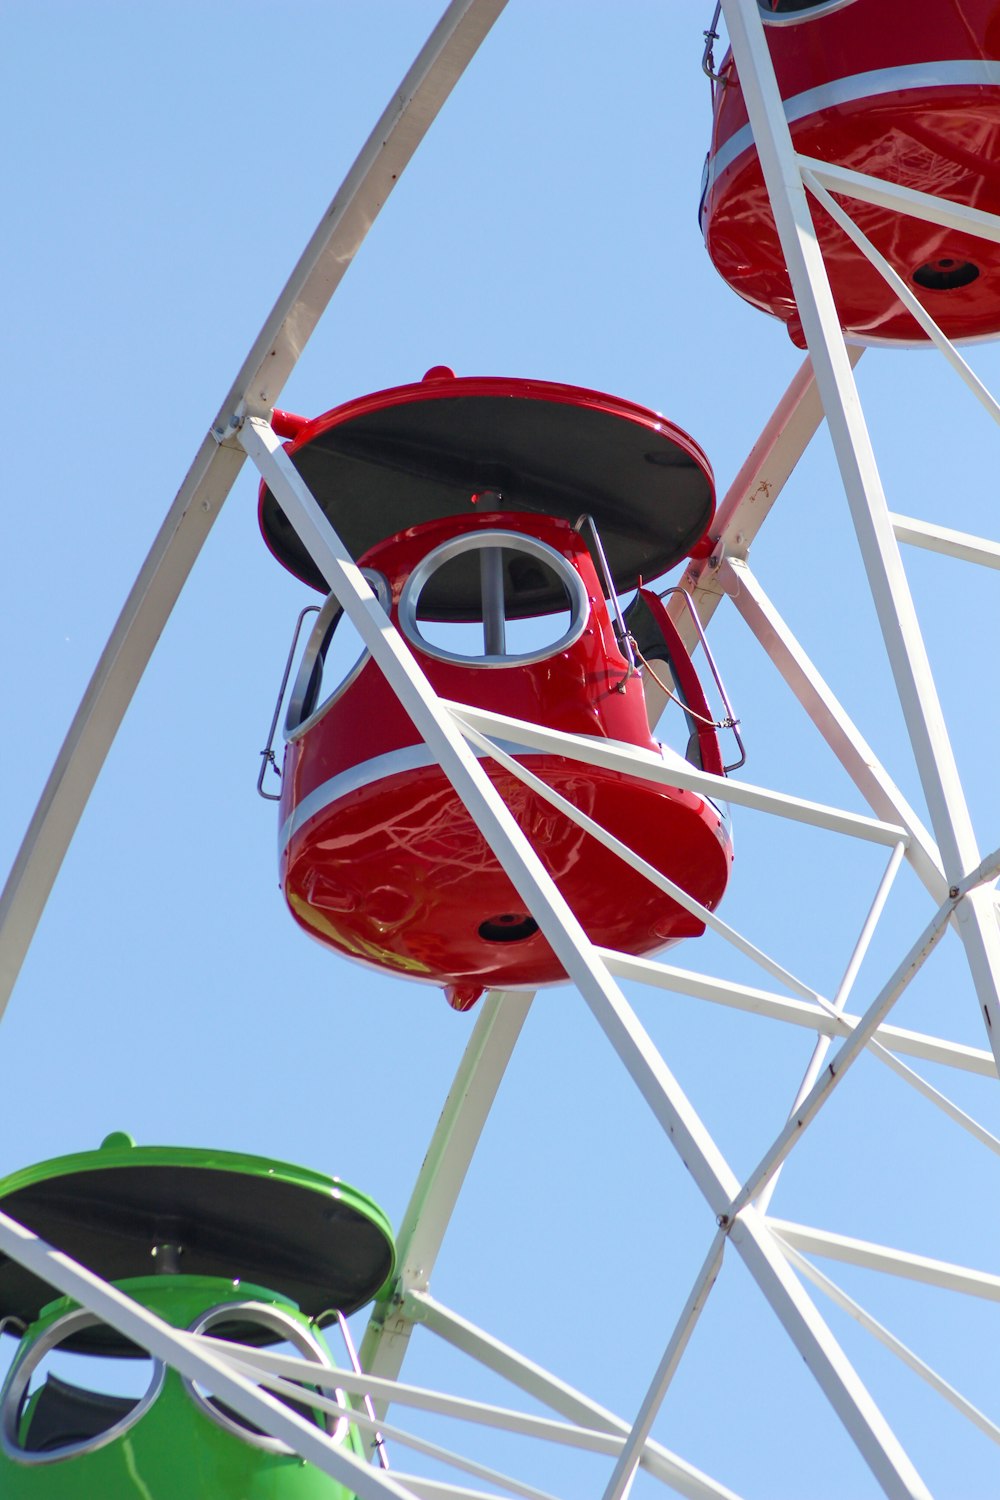 red and white ferris wheel under blue sky during daytime